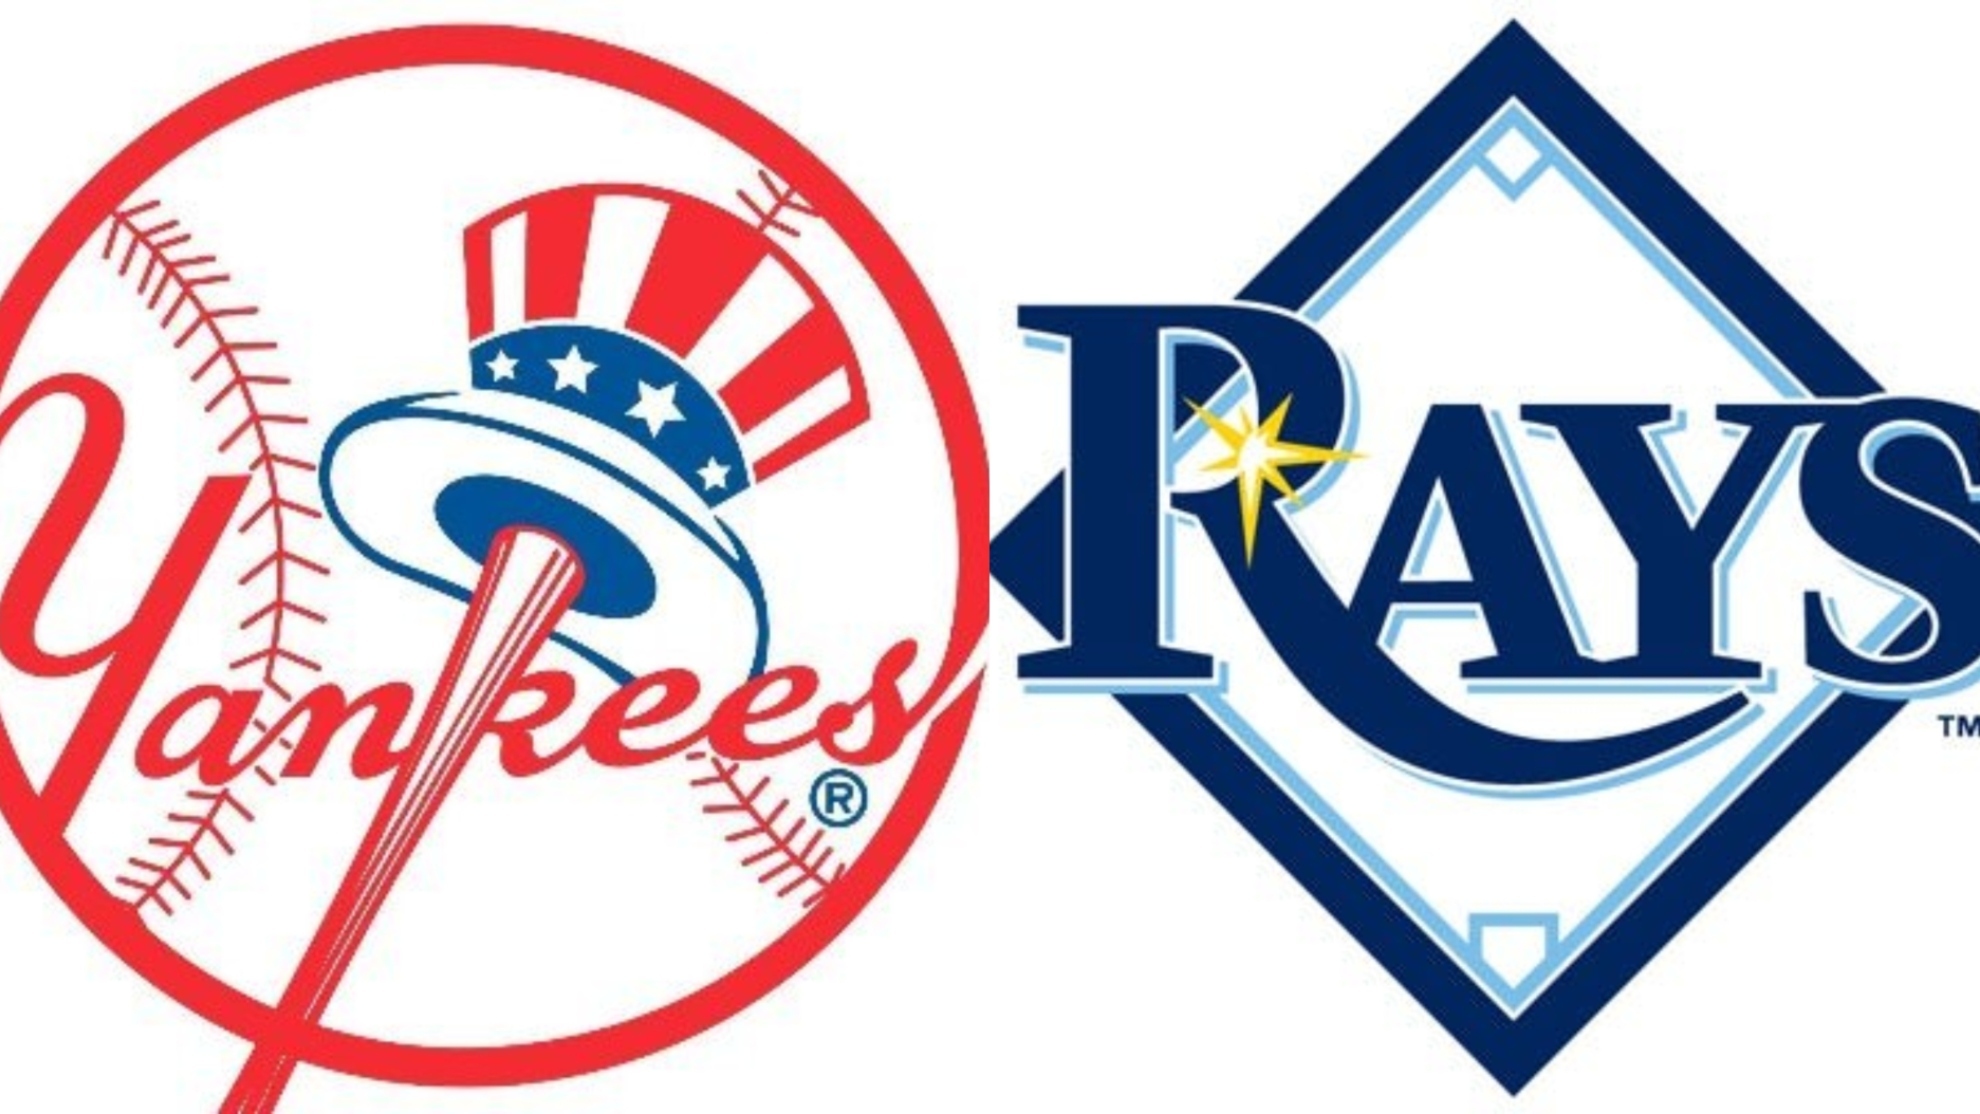 Yankees and Rays opt to post gun facts after Uvalde school massacre